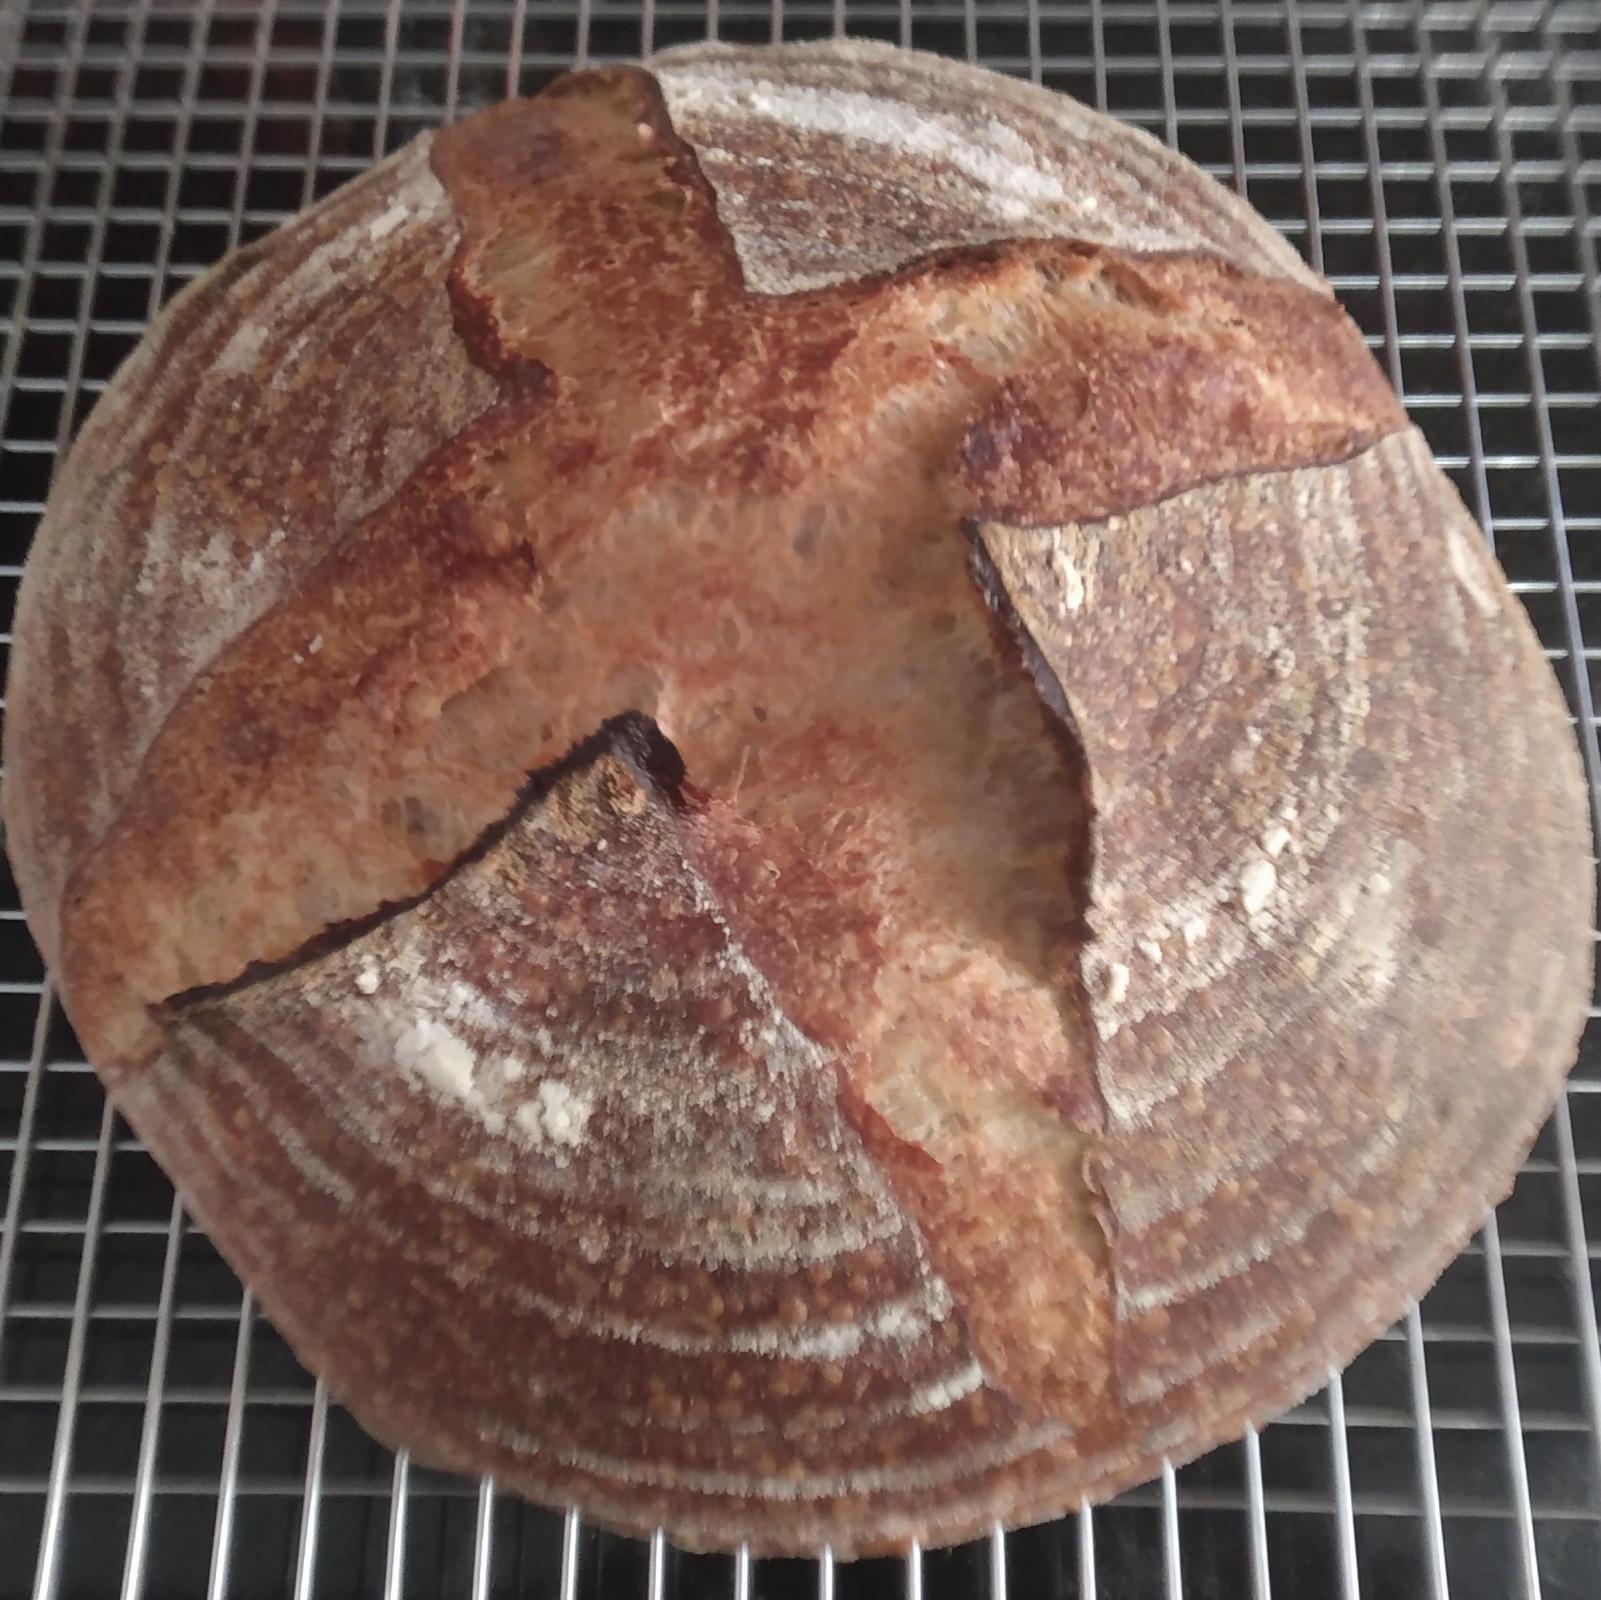 Now this, there's ears on a couple of the intersections where the scores meet, and the loaf is kinda uneven. Poor expansion.